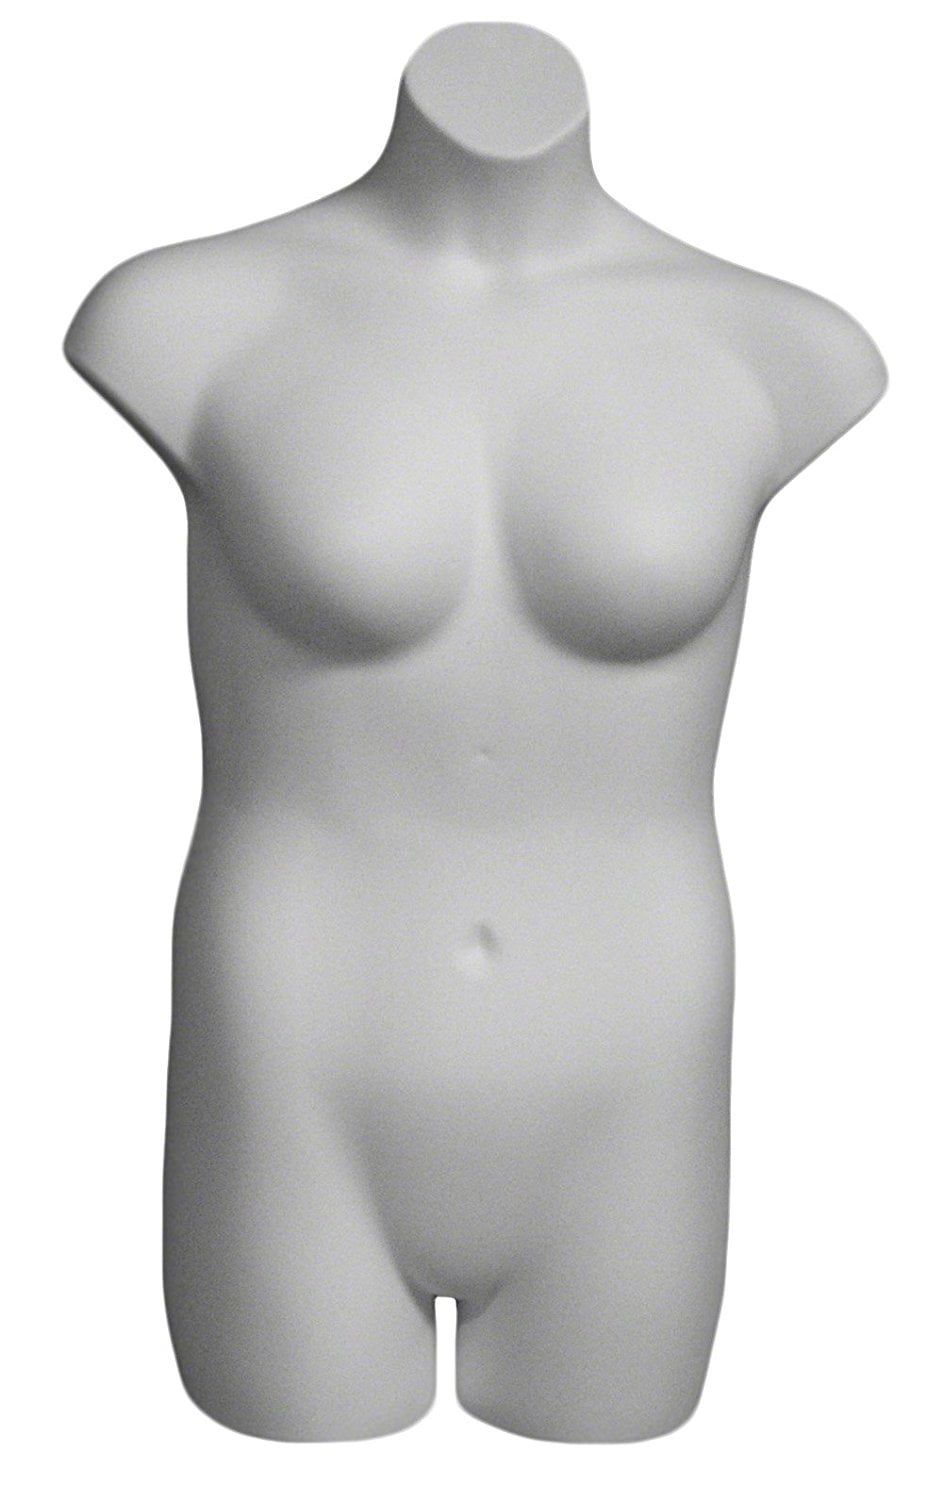 34 in Tall Female Torso Mannequin Torso Body Form Arms Free Standing White FT1WT 